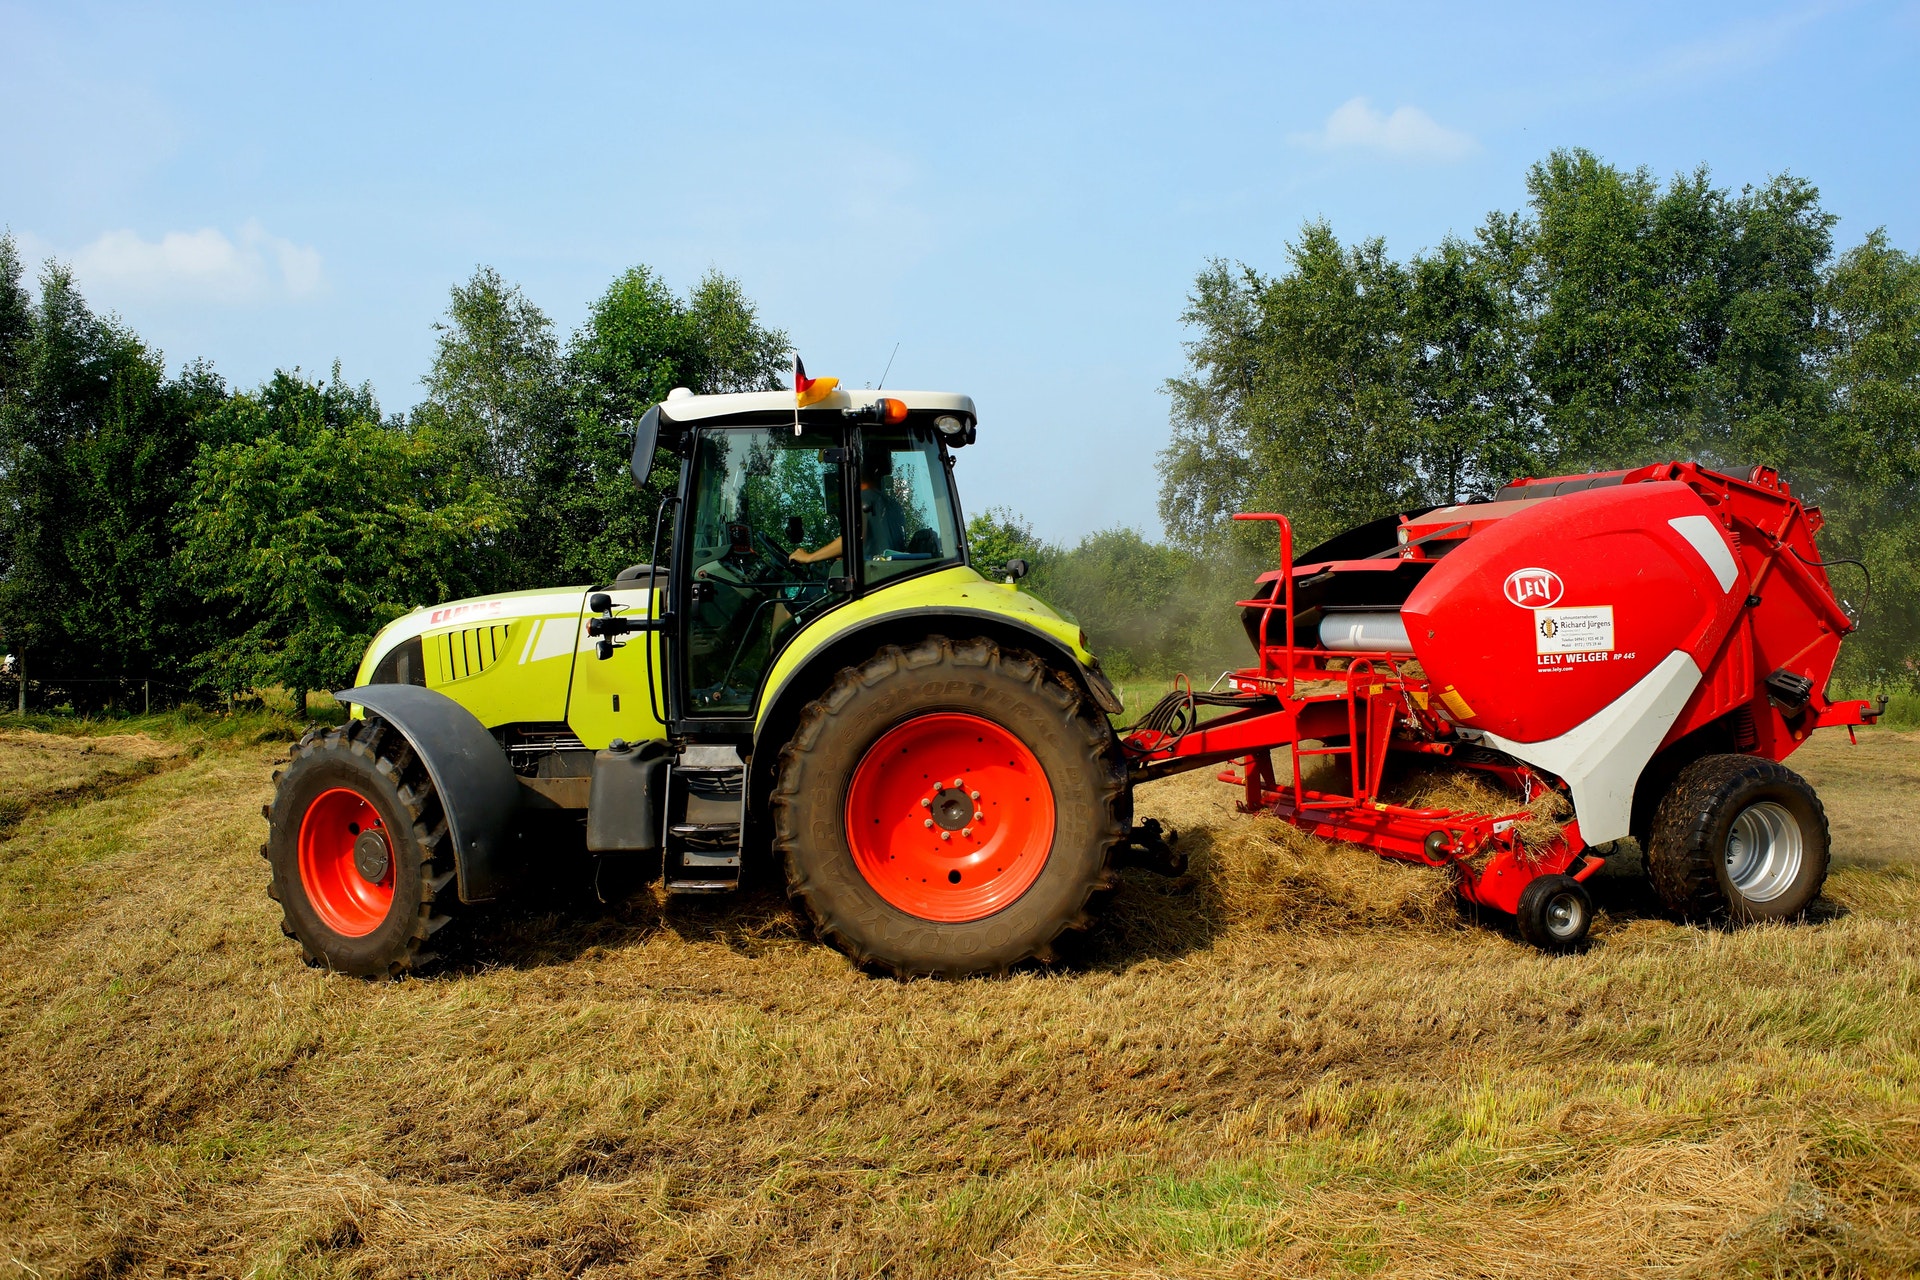 Tractor towing Customer Relationship Management for Agri Engineering